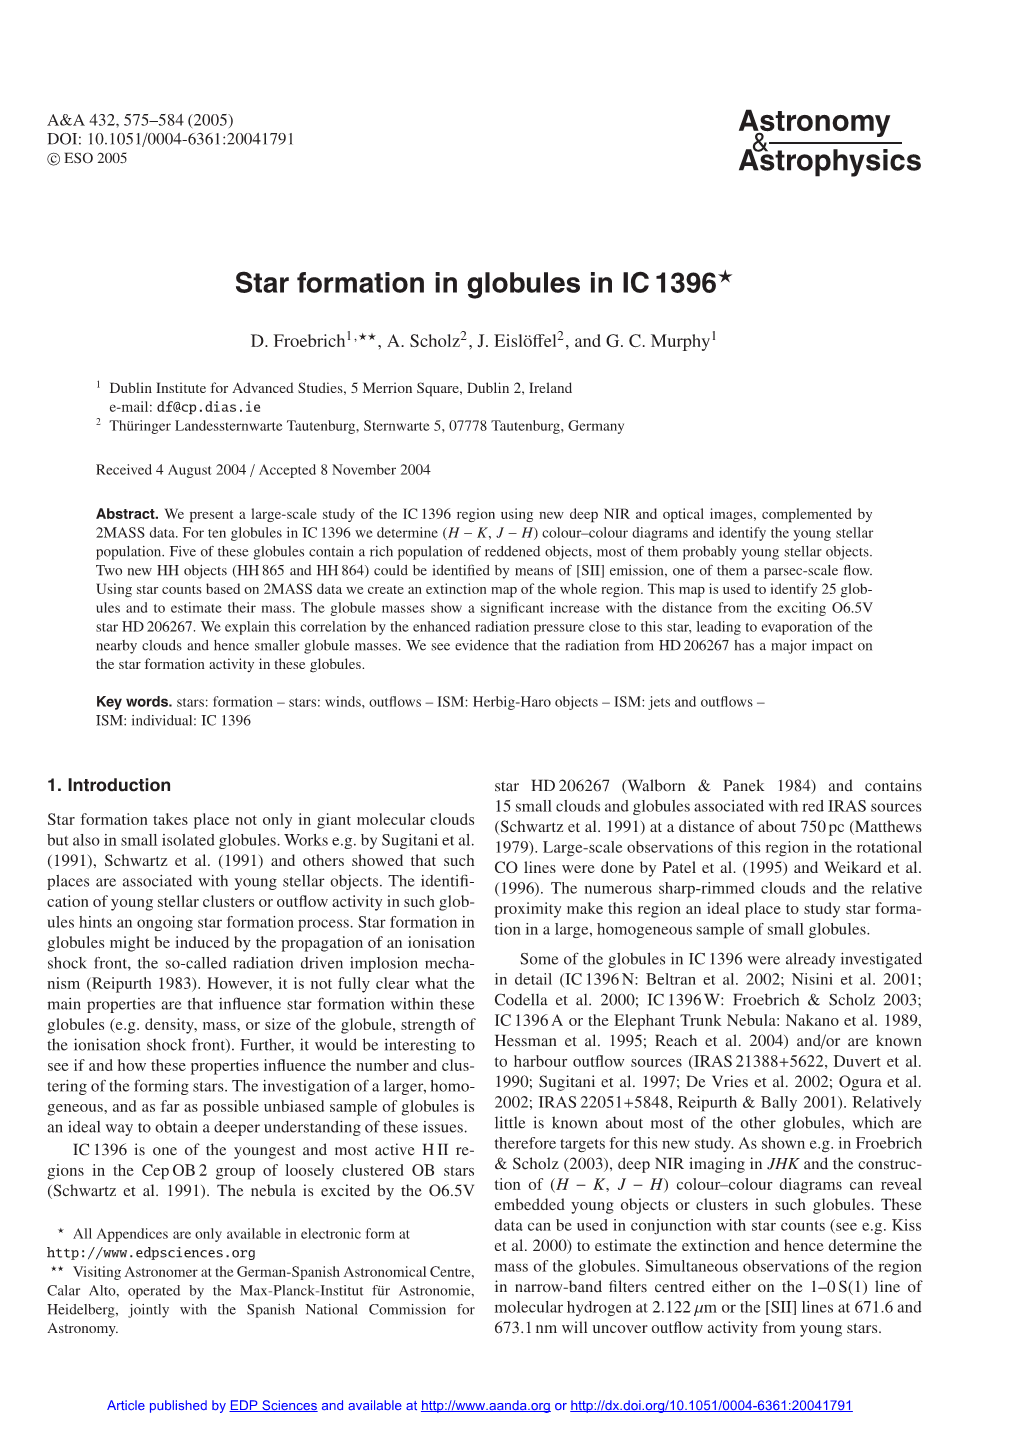 Star Formation in Globules in IC 1396